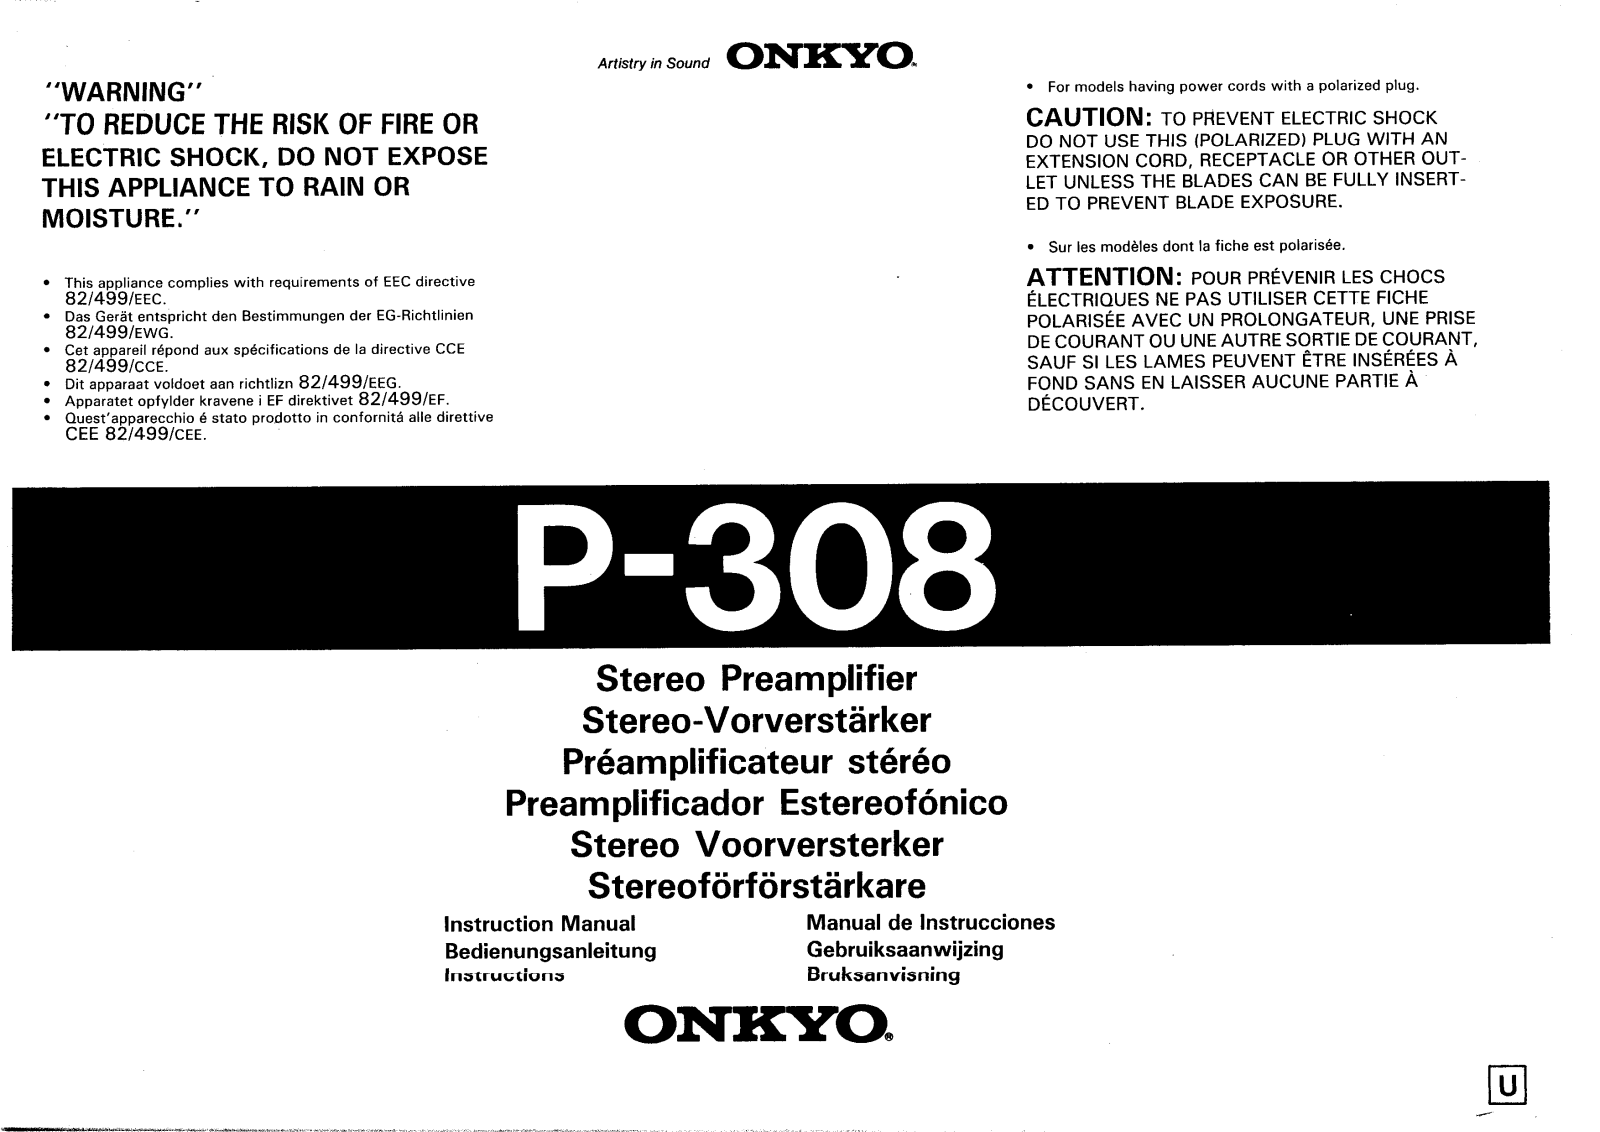 Onkyo P-308 Owners manual